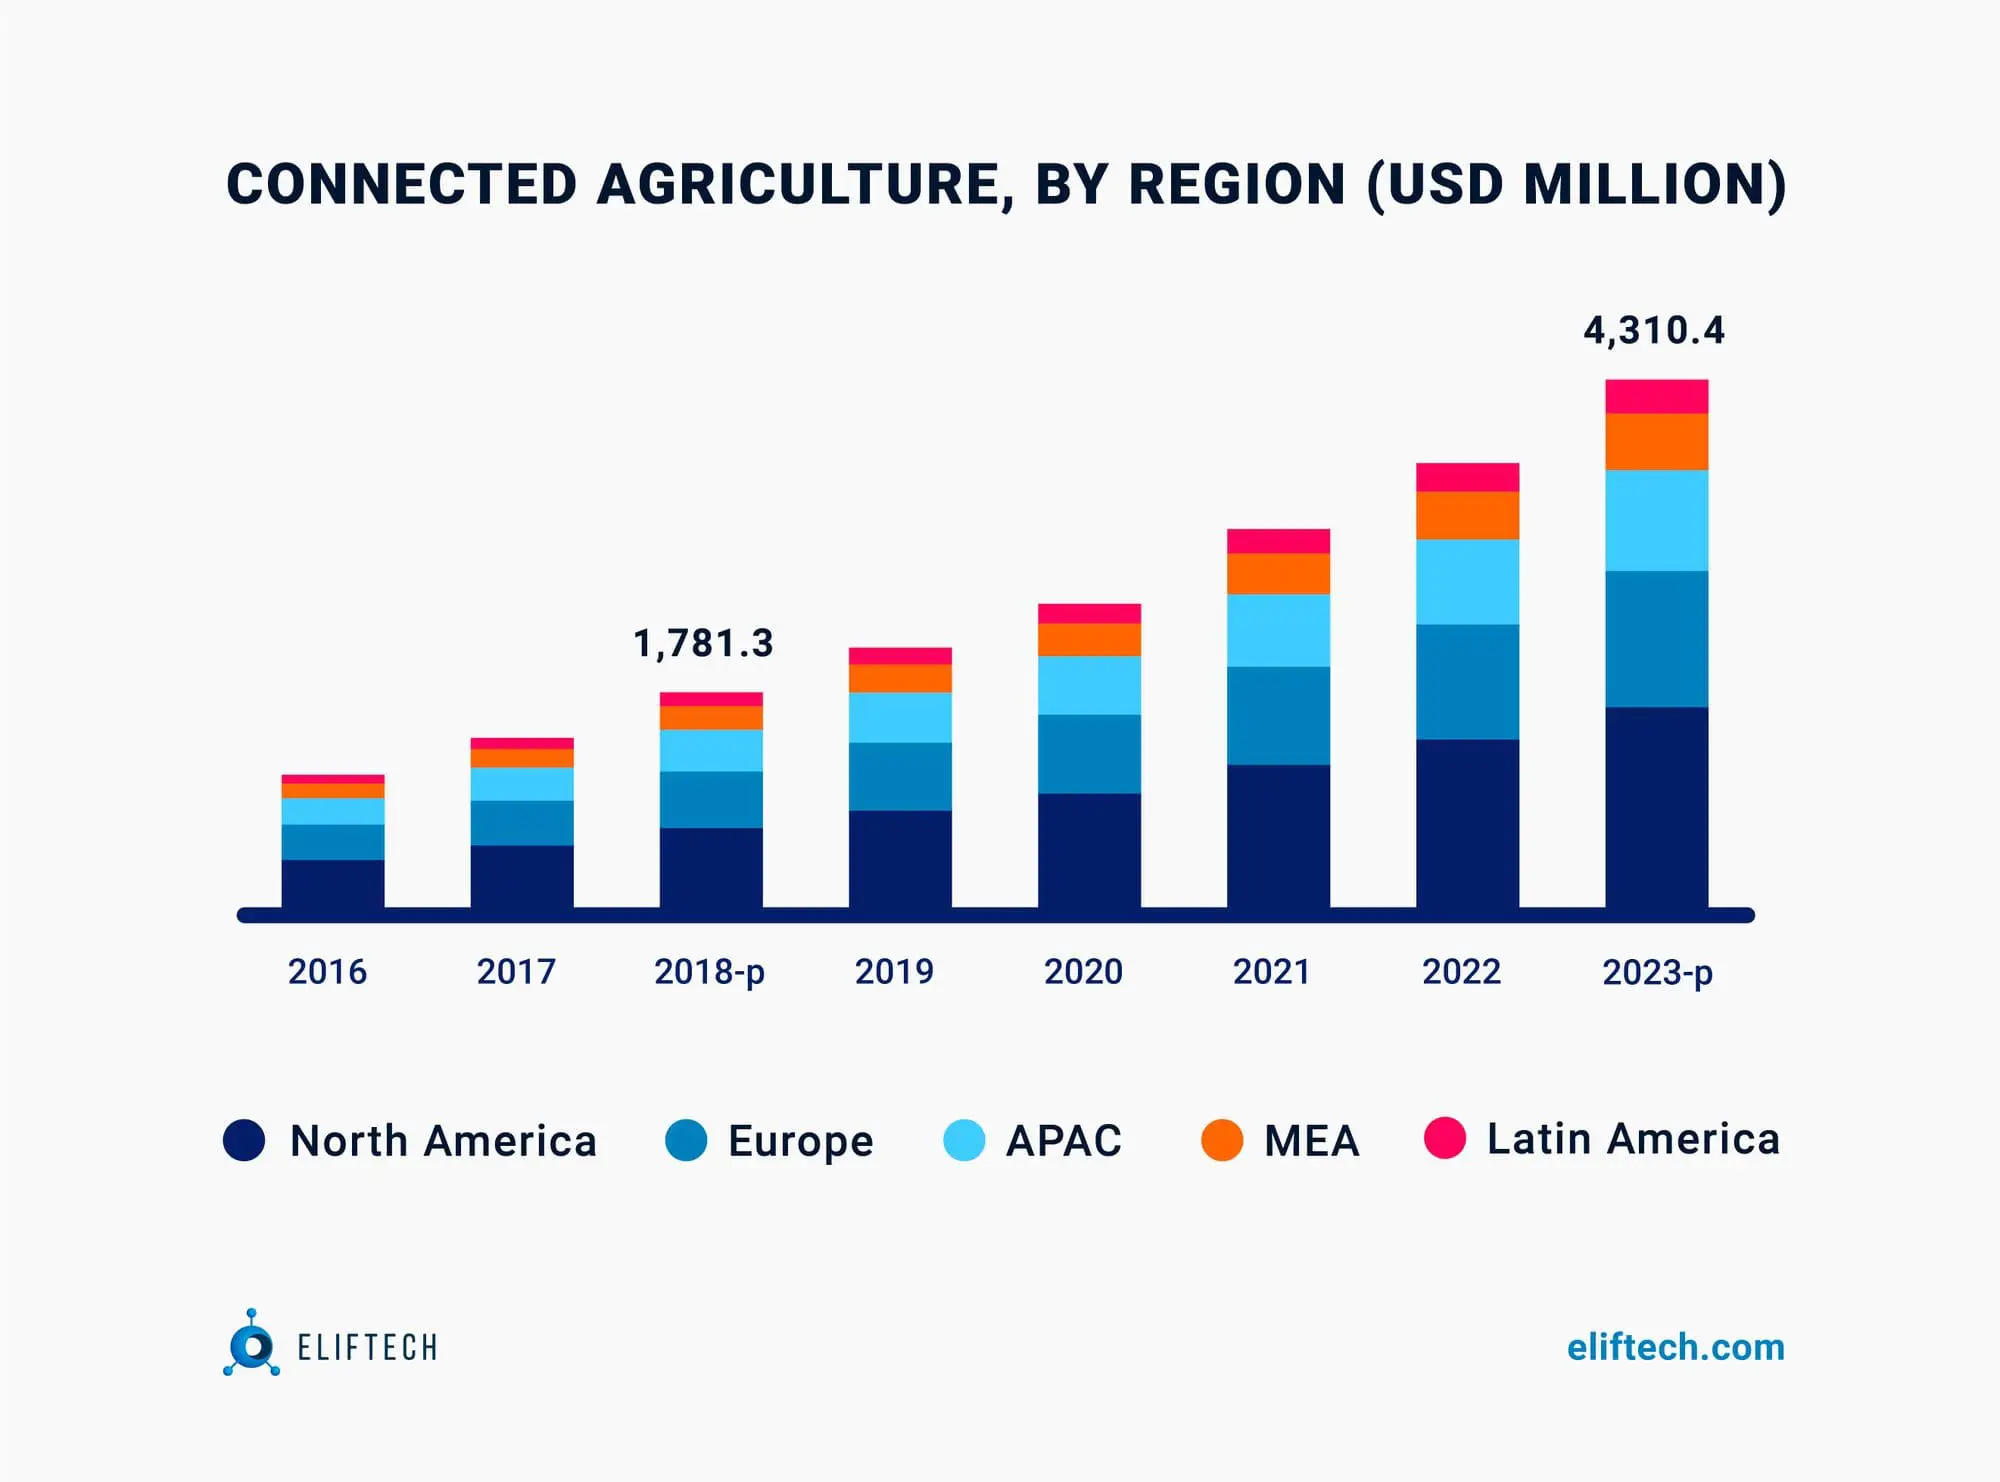 Connected Agriculture by region